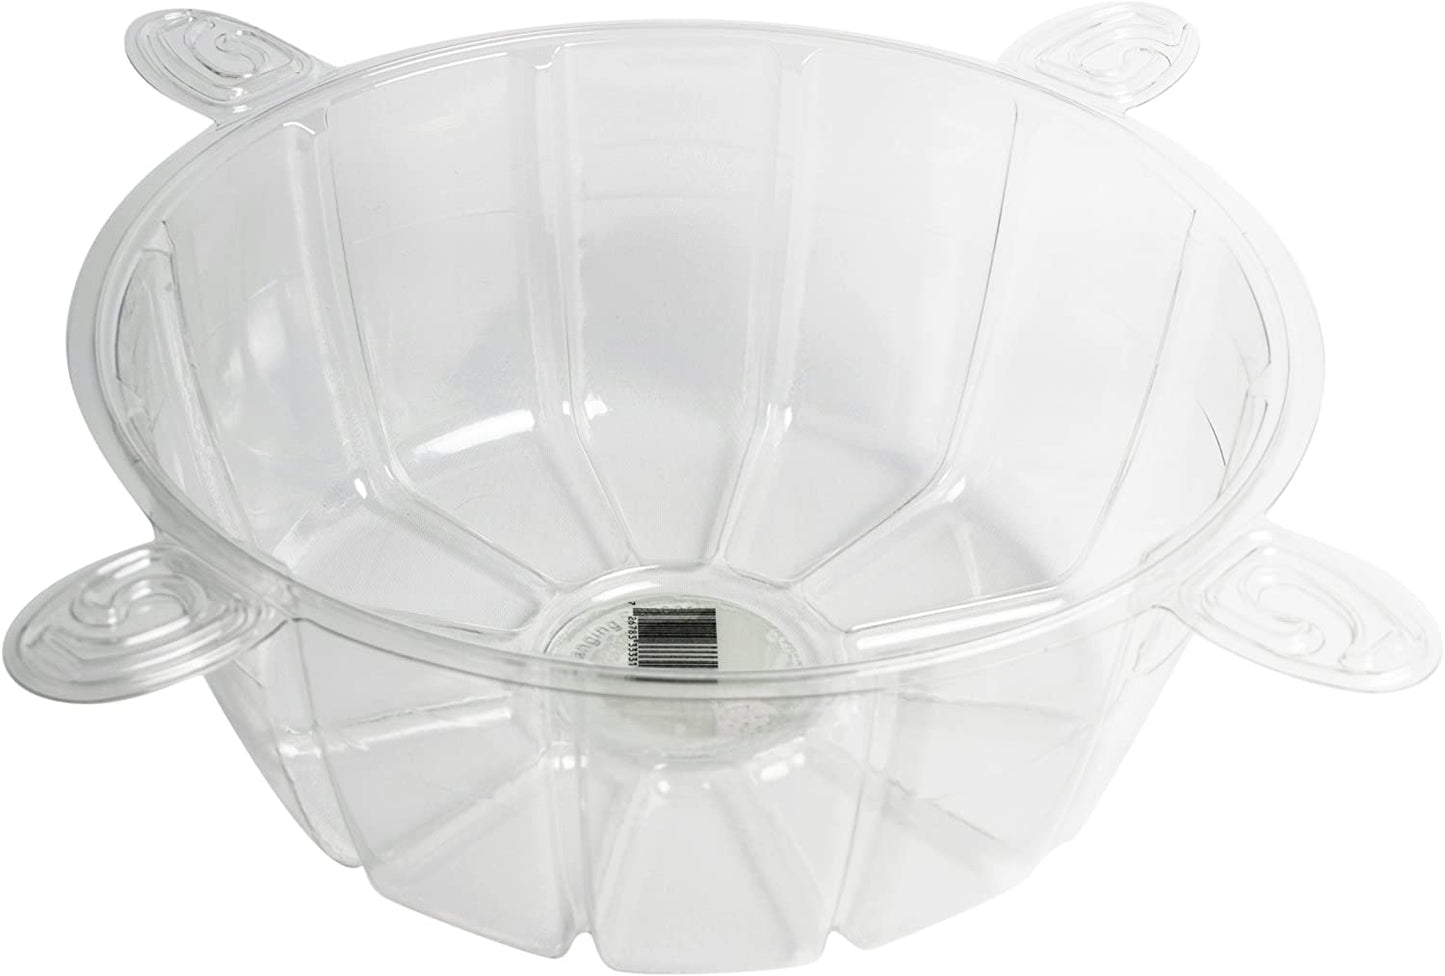 Plastec Clear Hanging Plant Saucer (12 Inch)